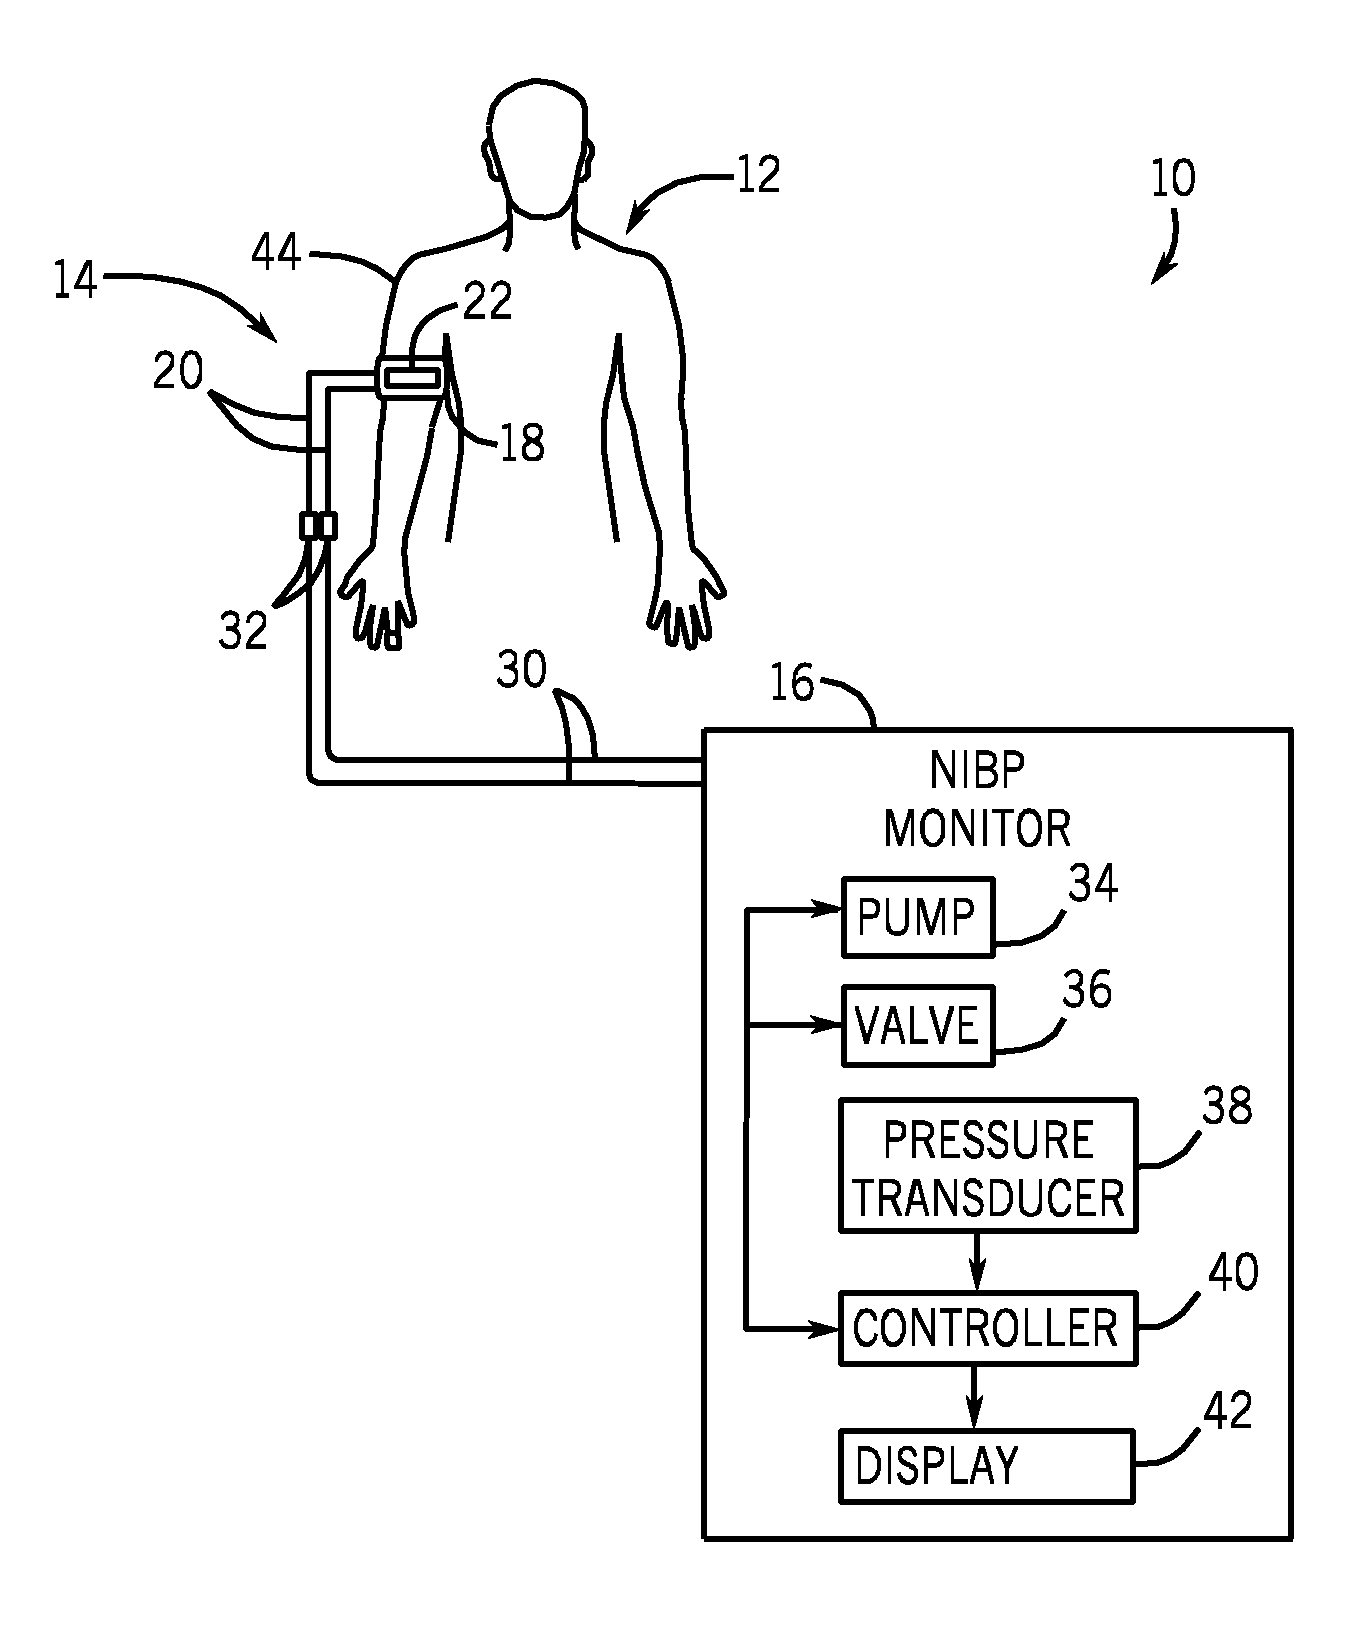 Apparatus and method for monitoring blood pressure cuff wear